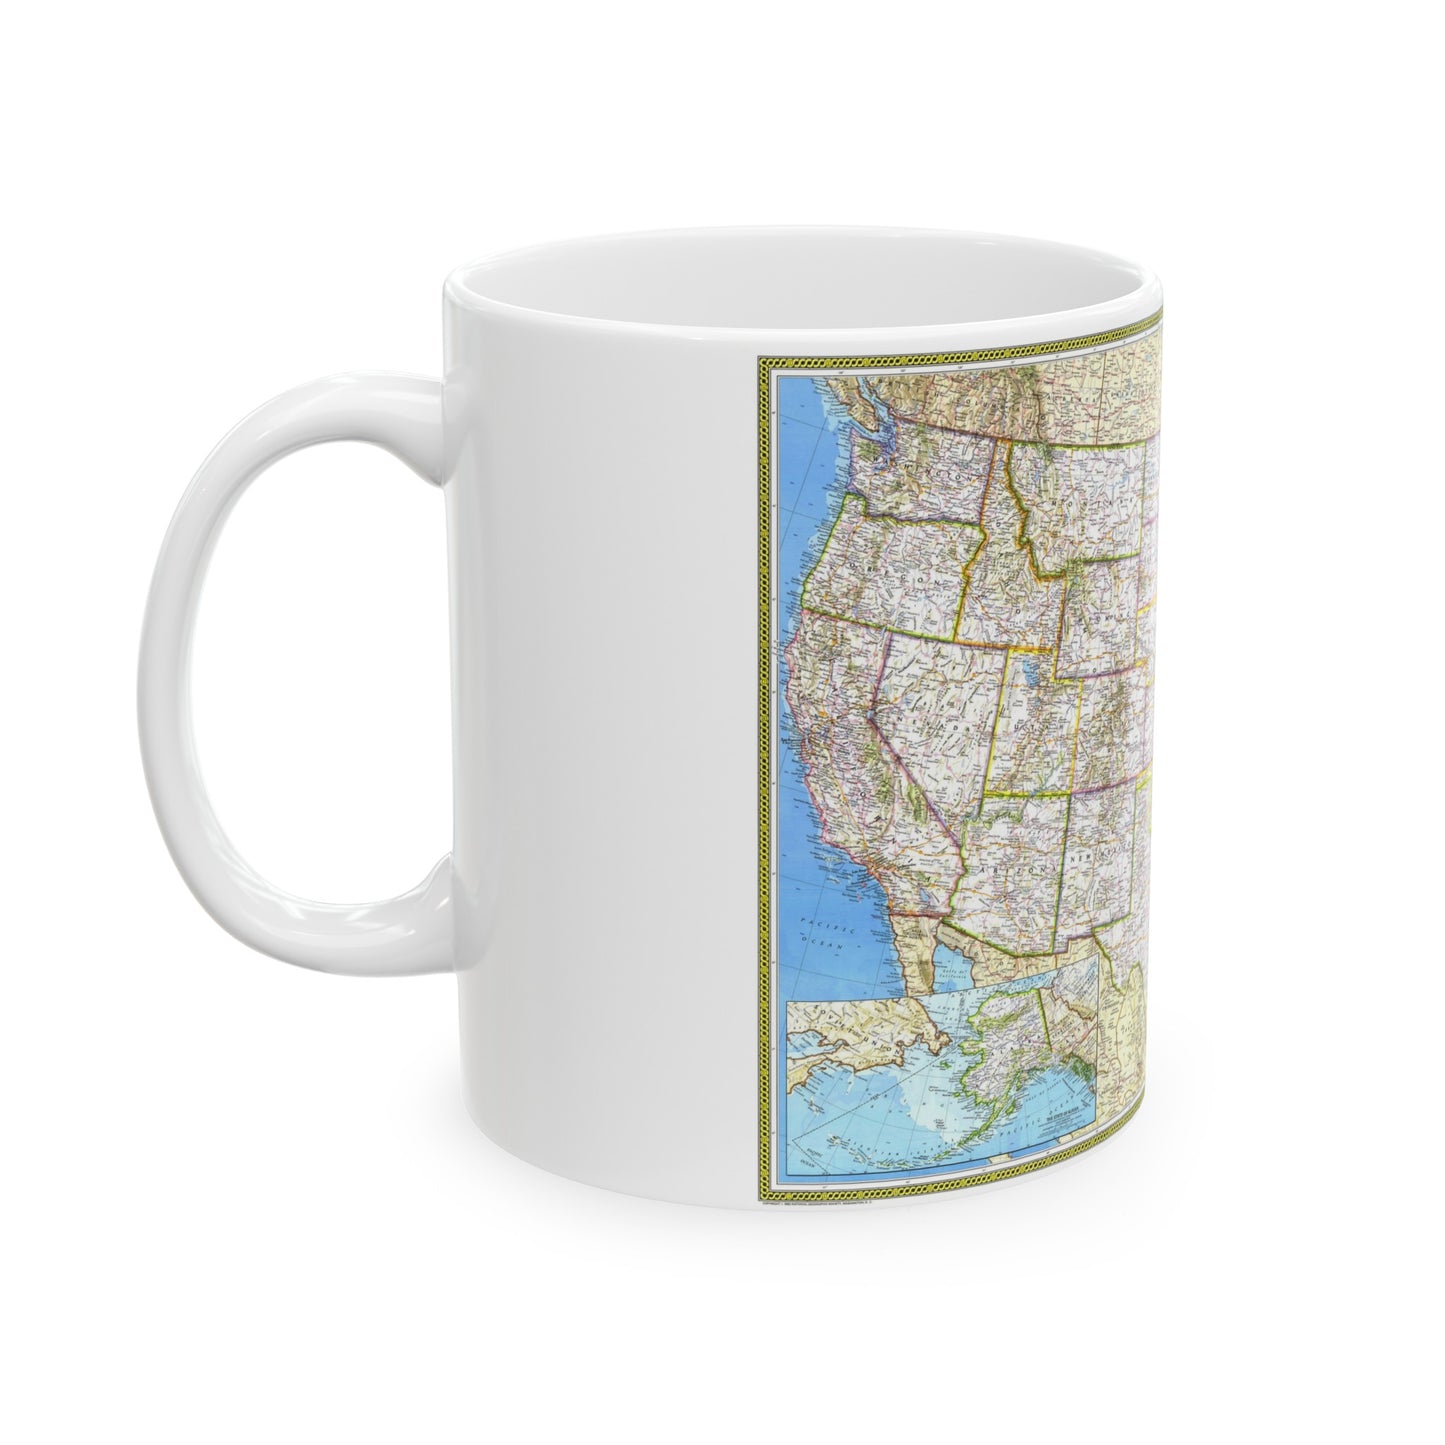 USA - The United States (1982) (Map) White Coffee Mug-The Sticker Space